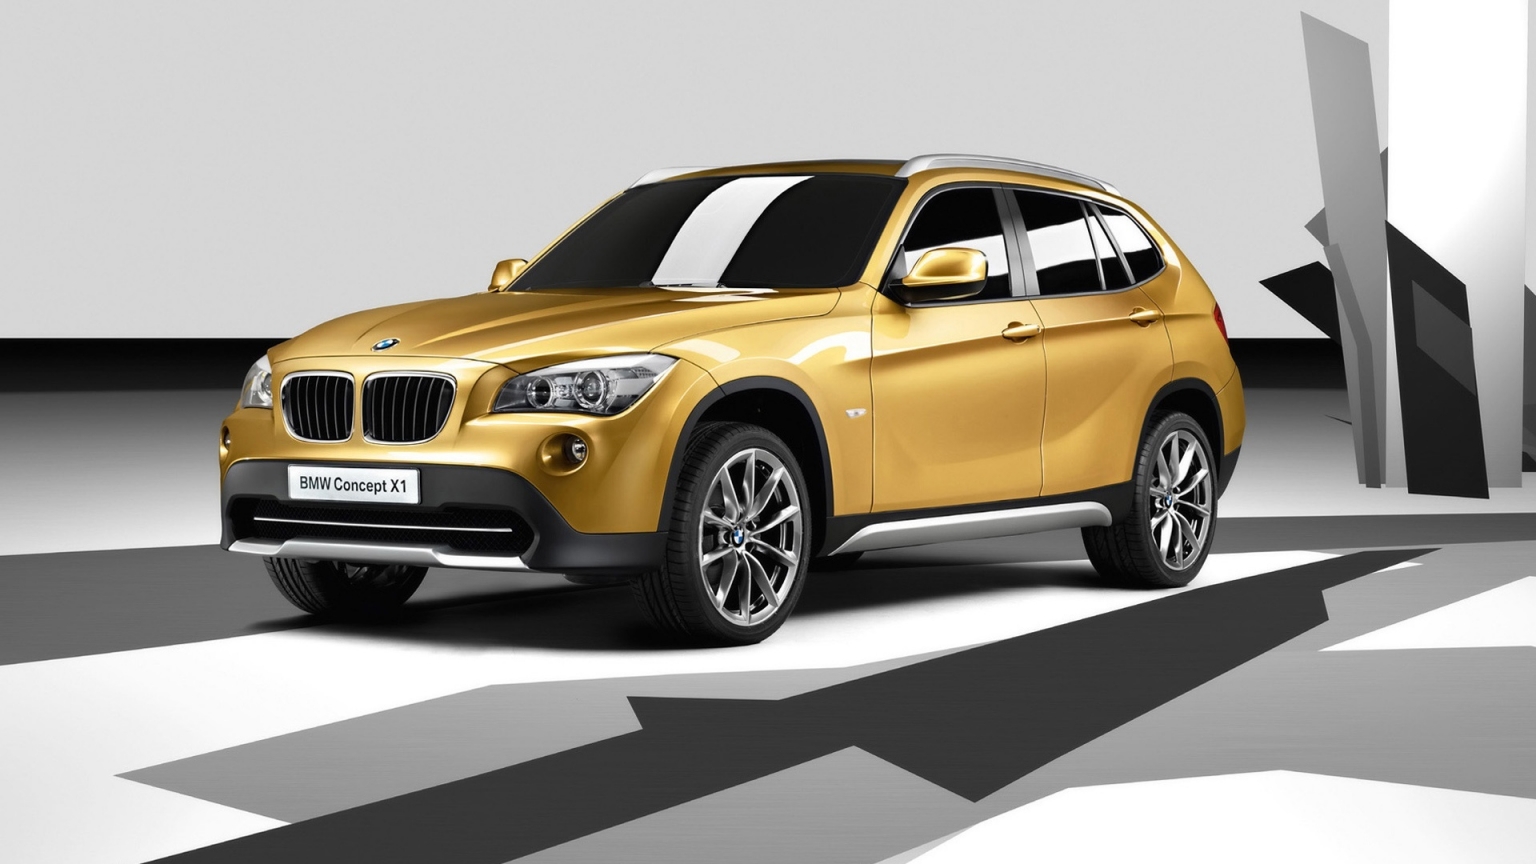 BMW Concept X1 2008 for 1536 x 864 HDTV resolution